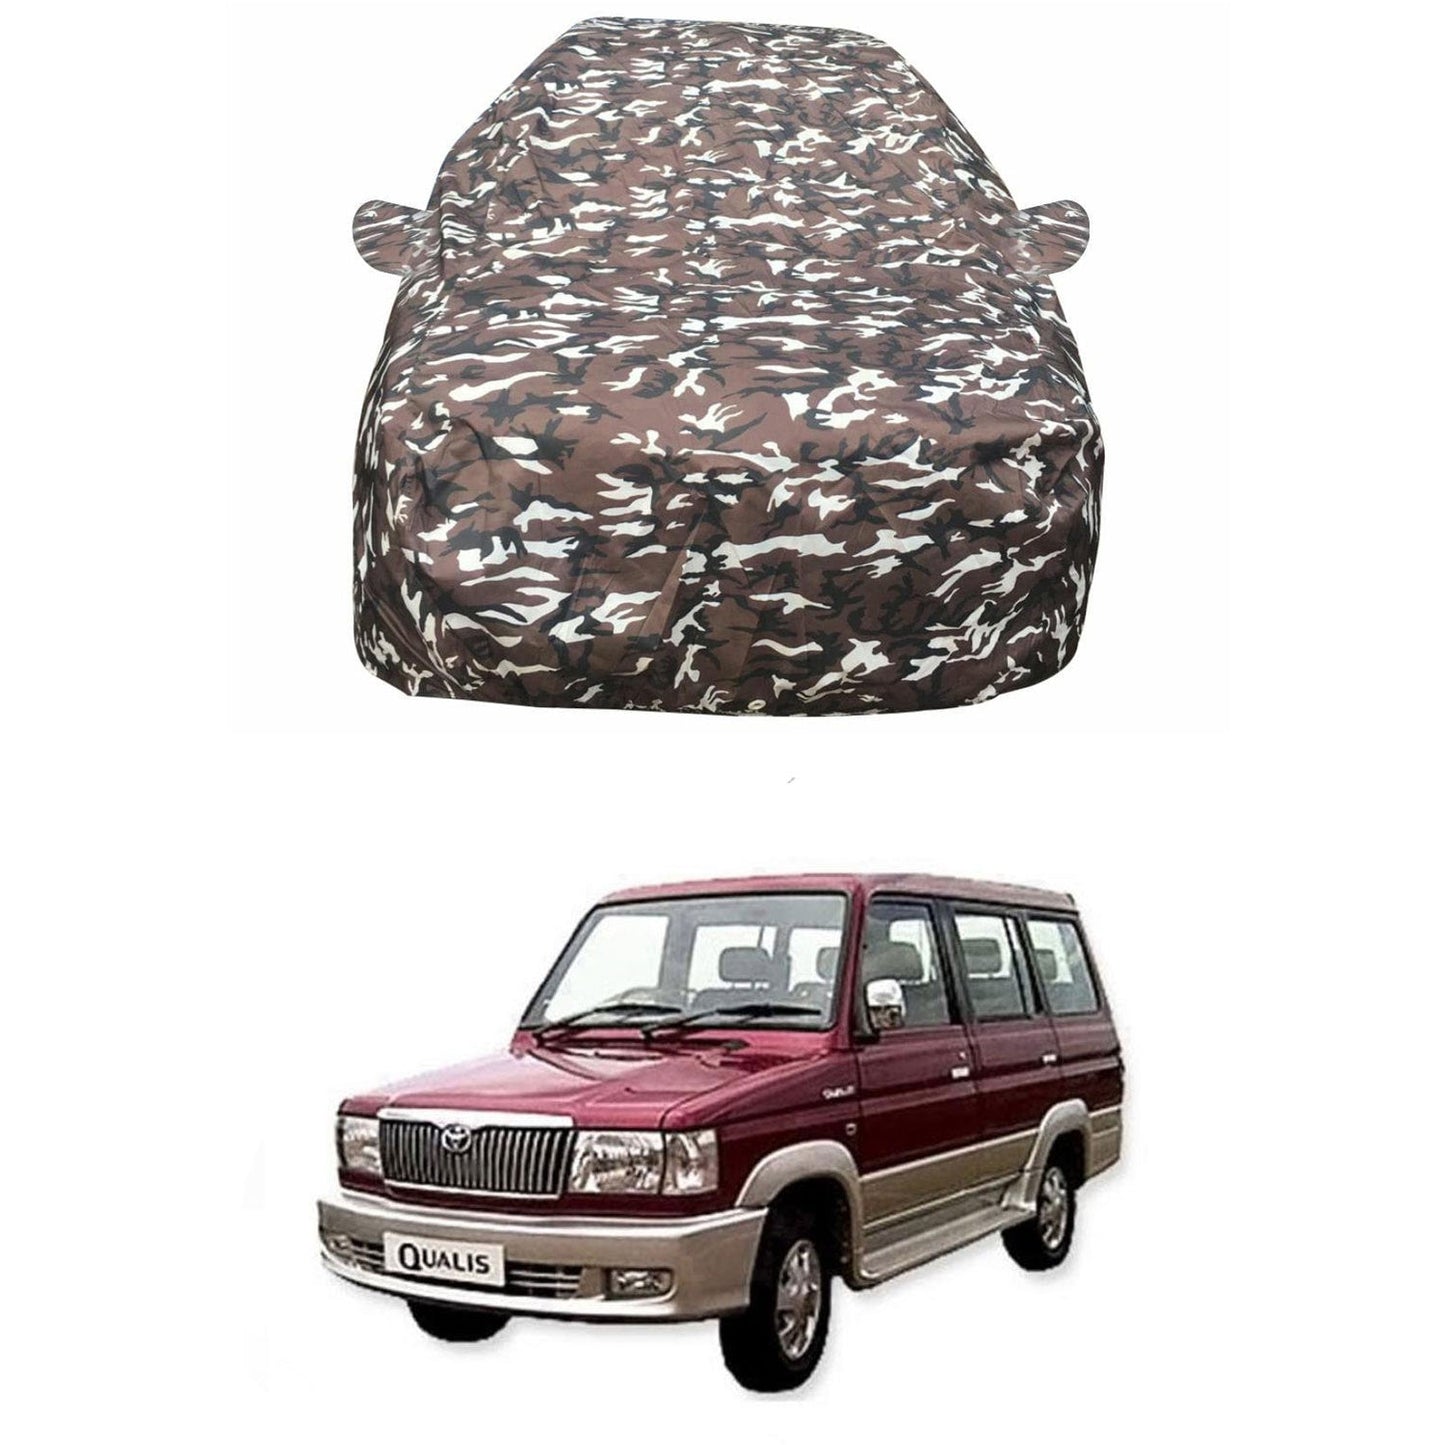 Oshotto Ranger Design Made of 100% Waterproof Fabric Multicolor Car Body Cover with Mirror Pocket For Toyota Qualis